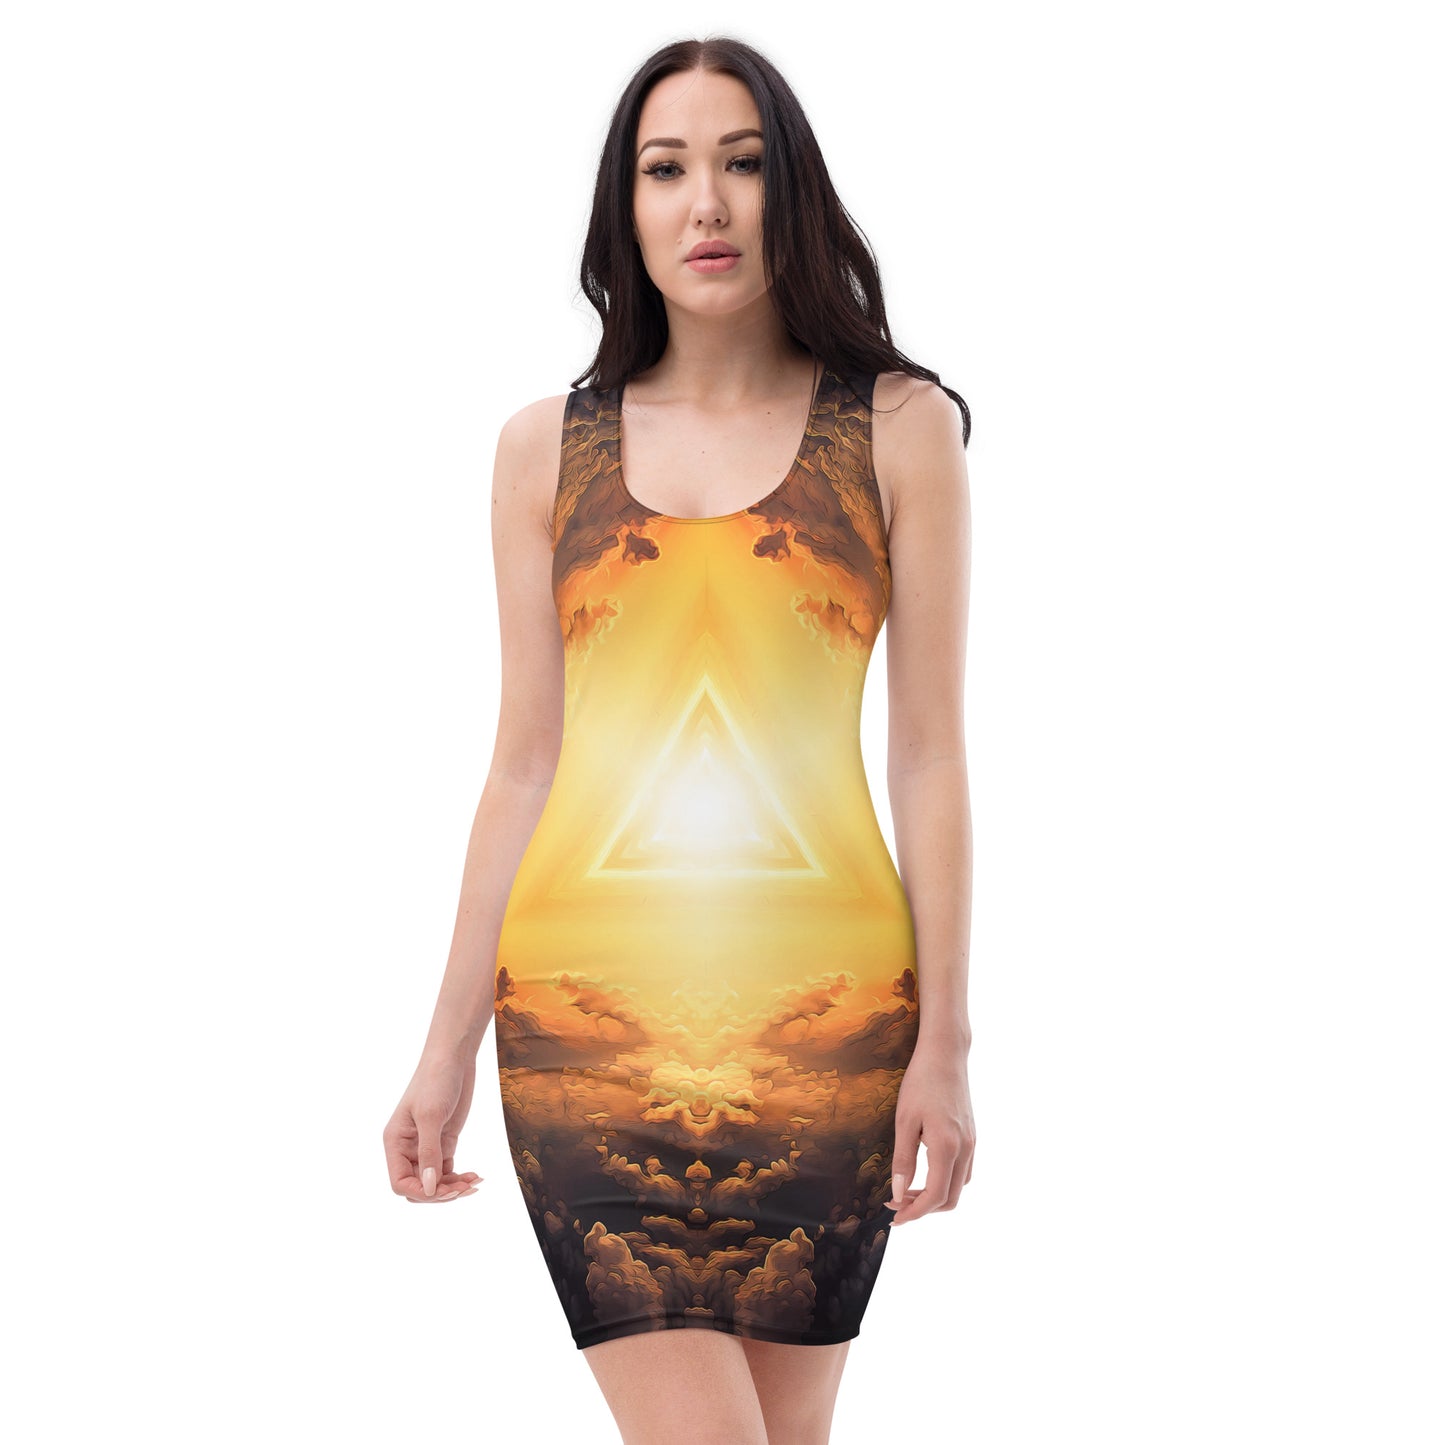 "Adieu" Bodycon FITTED DRESS